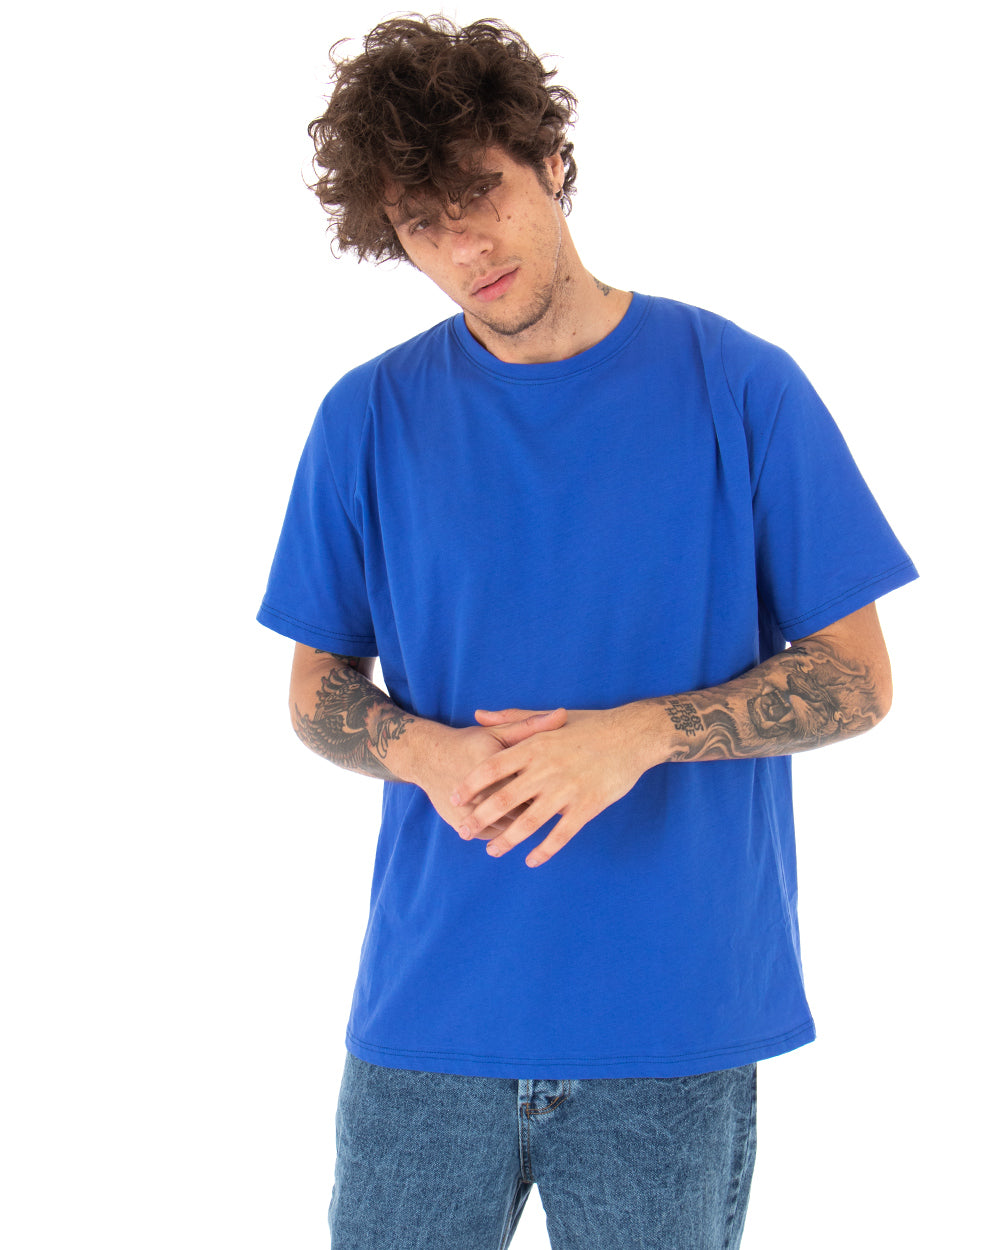 Men's T-shirt Oversize Round Neck Solid Color Casual Royal Blue Basic Short Sleeve GIOSAL-TS2925A